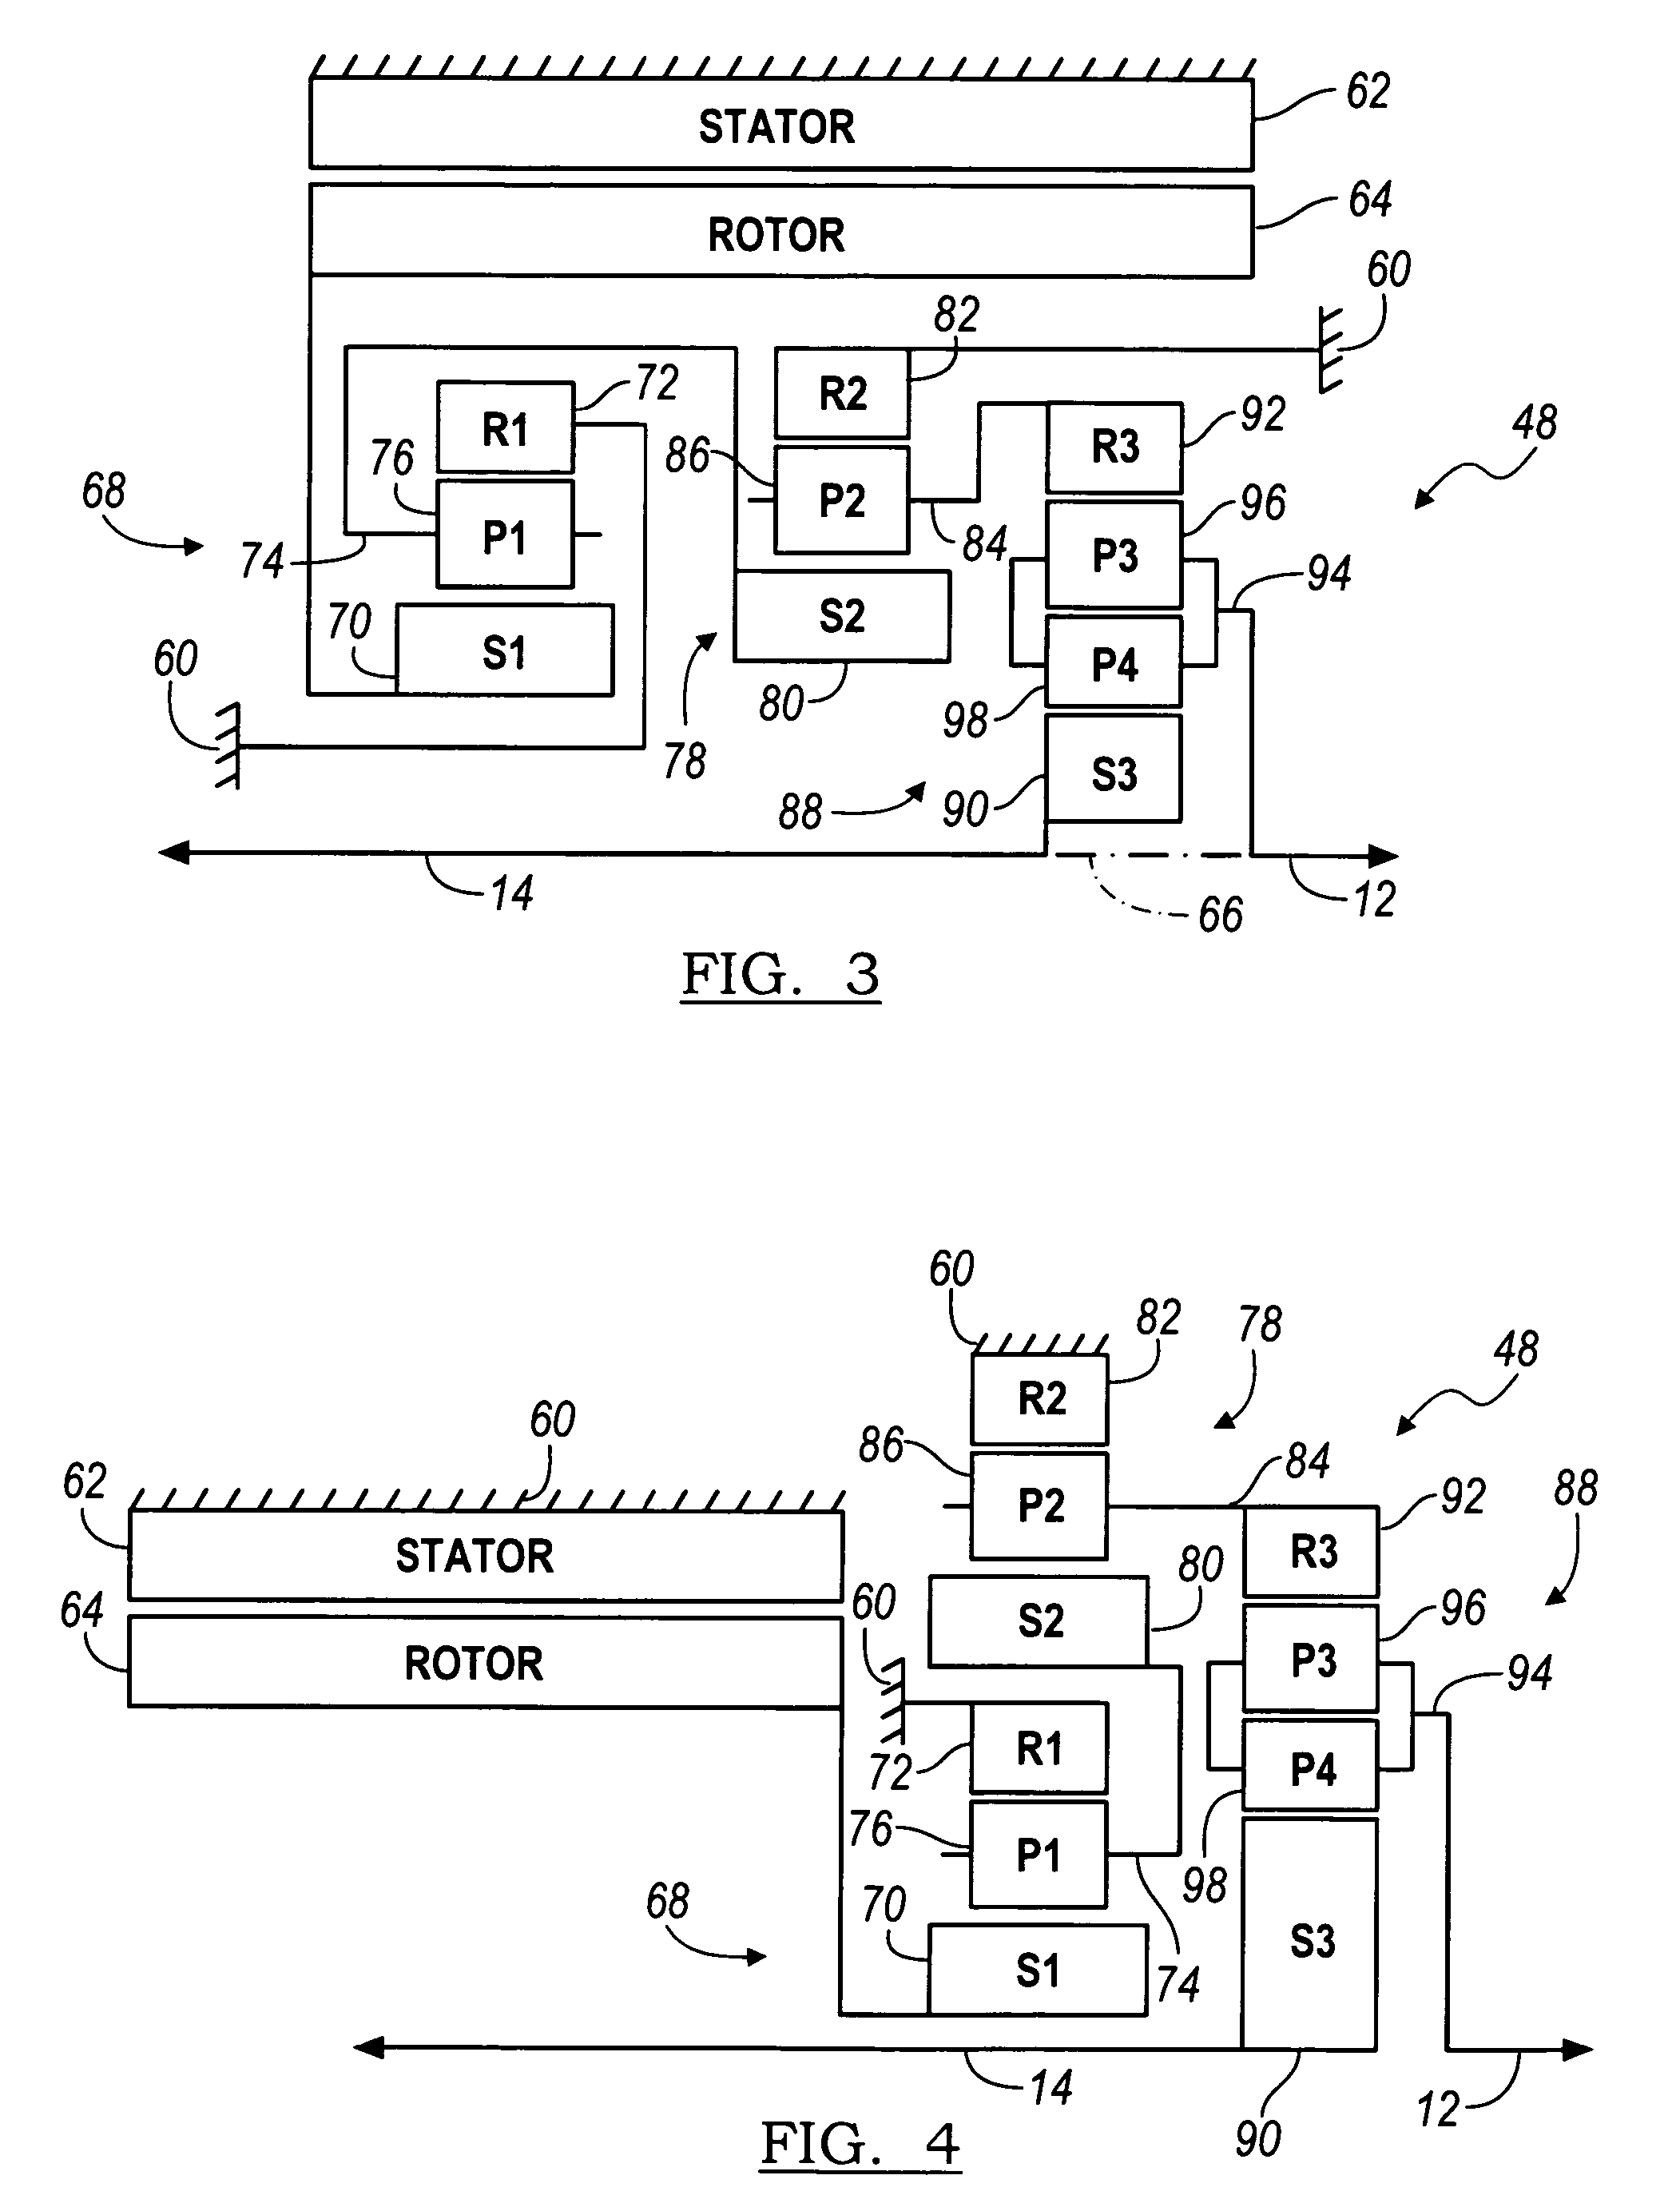 Speed reduction gear train with planetary differential for electric motor axle drive